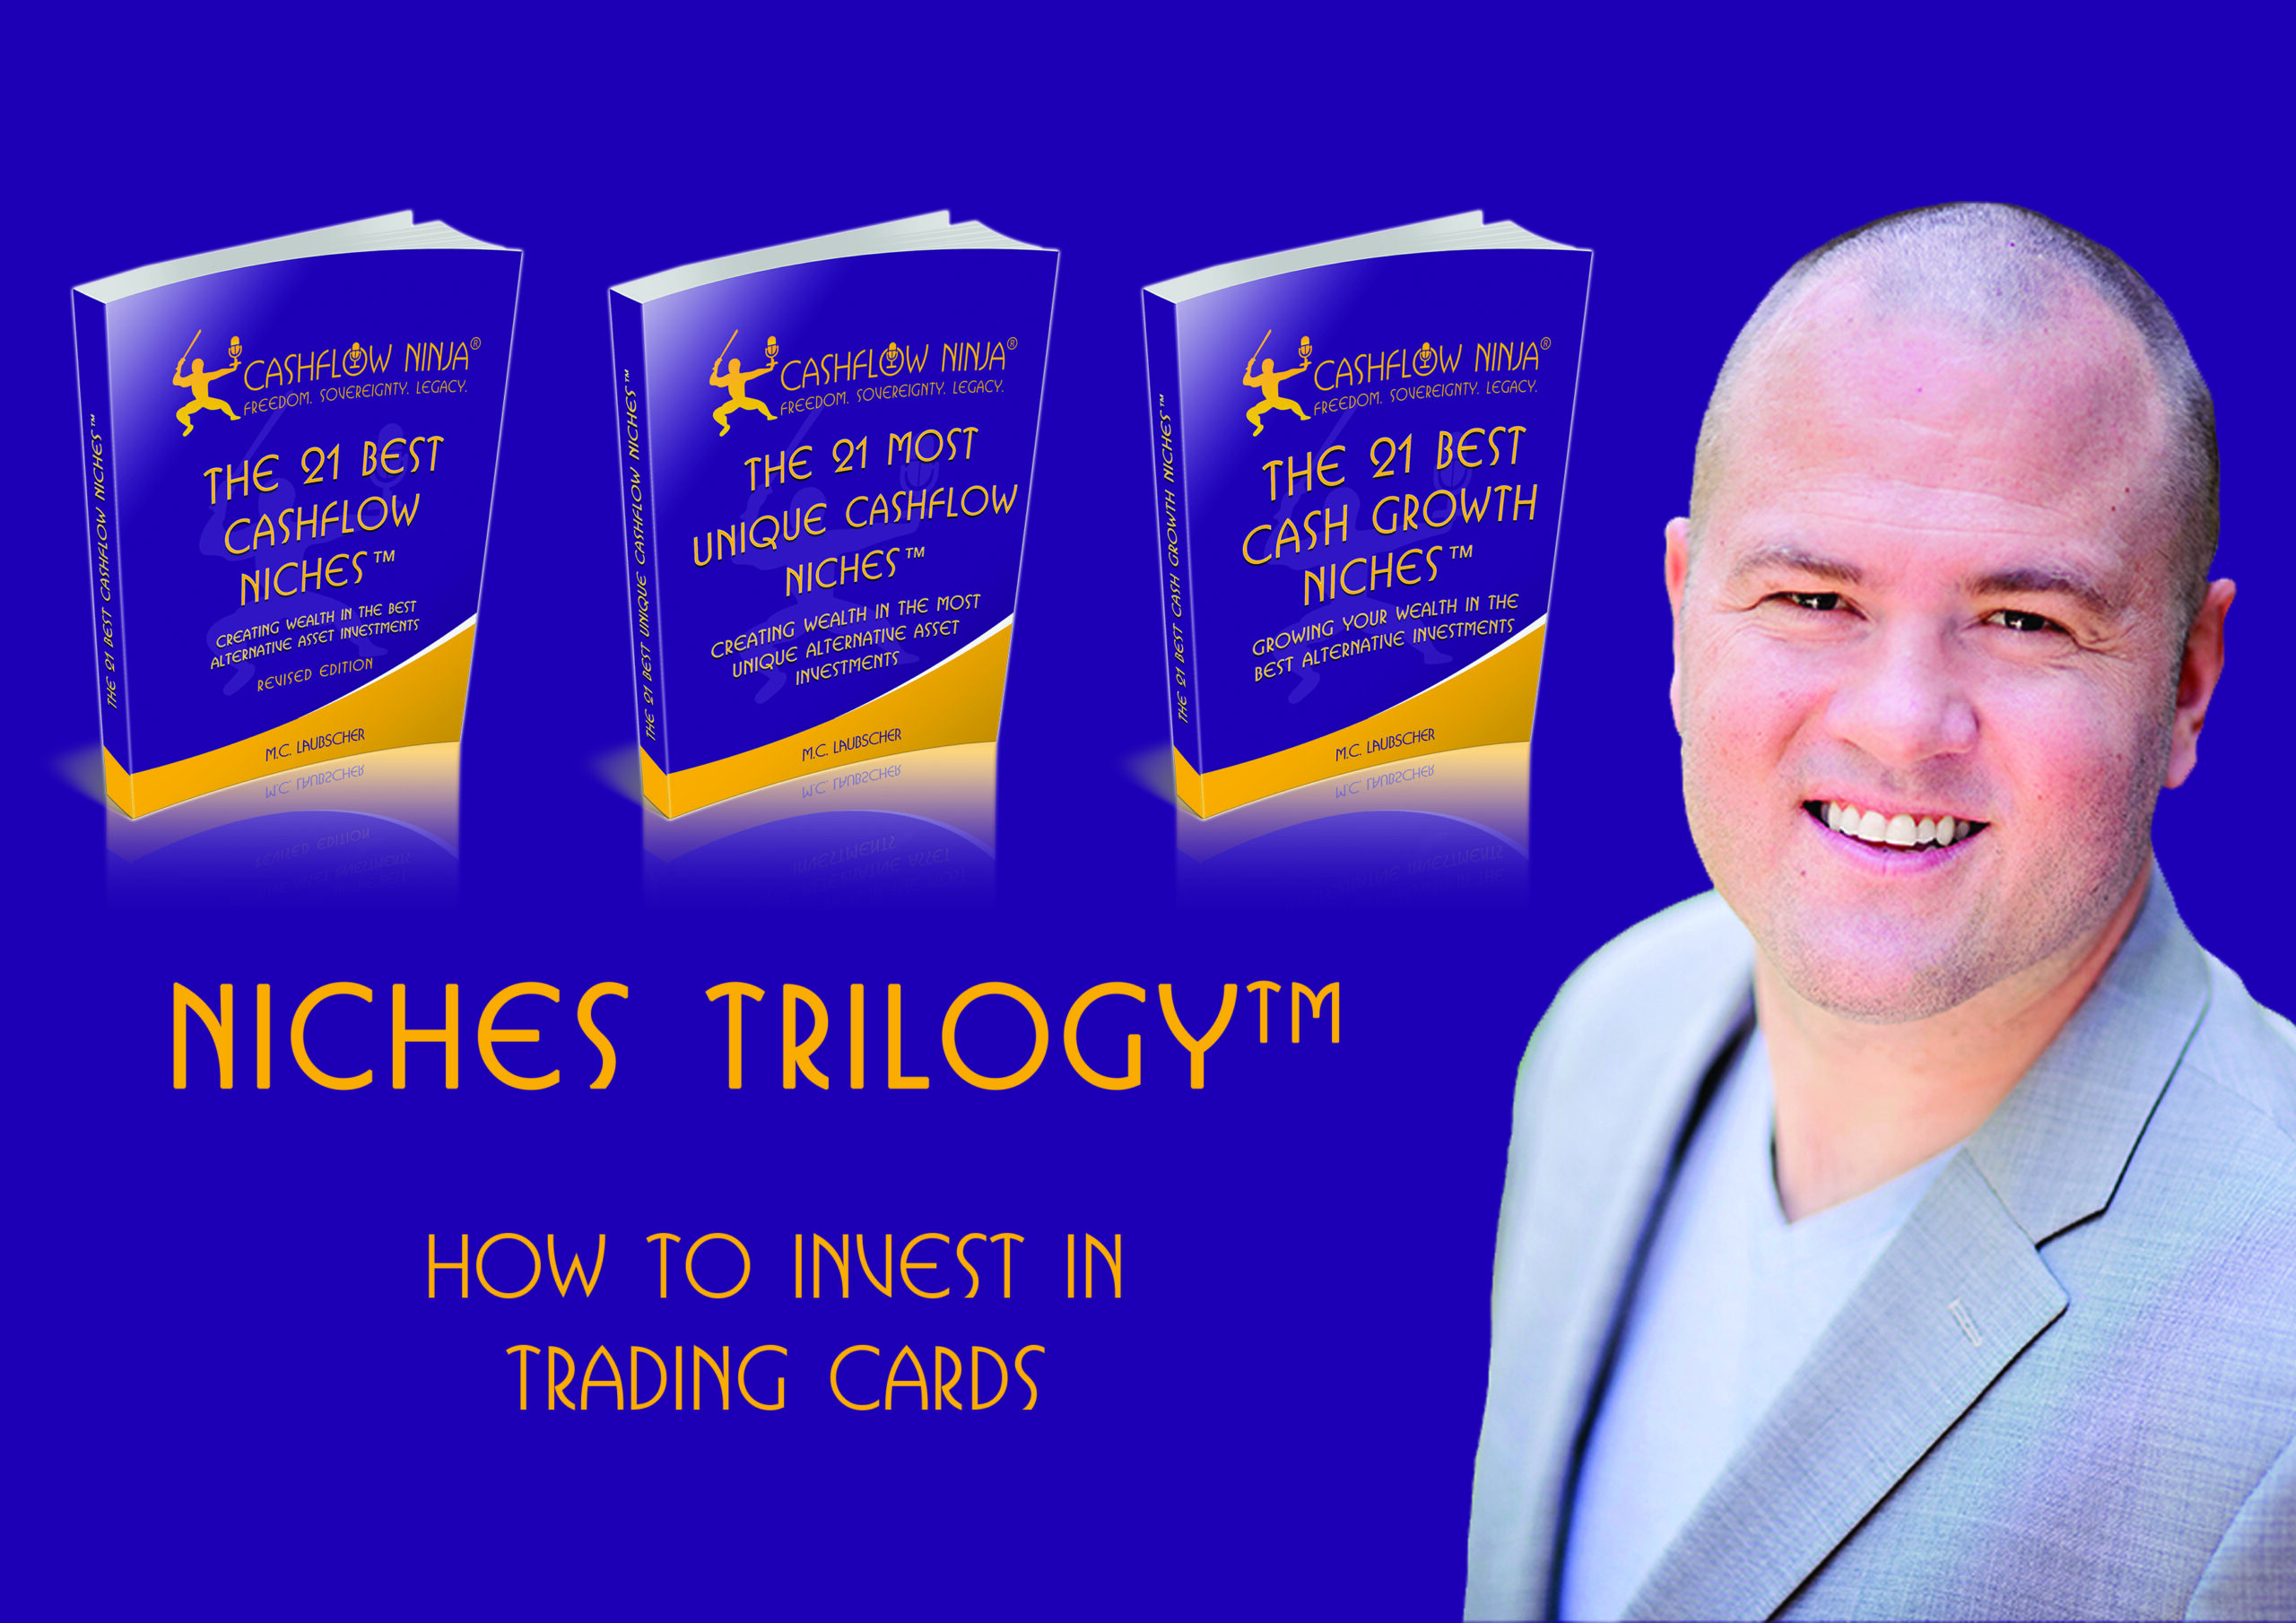 How To Invest In Trading Cards